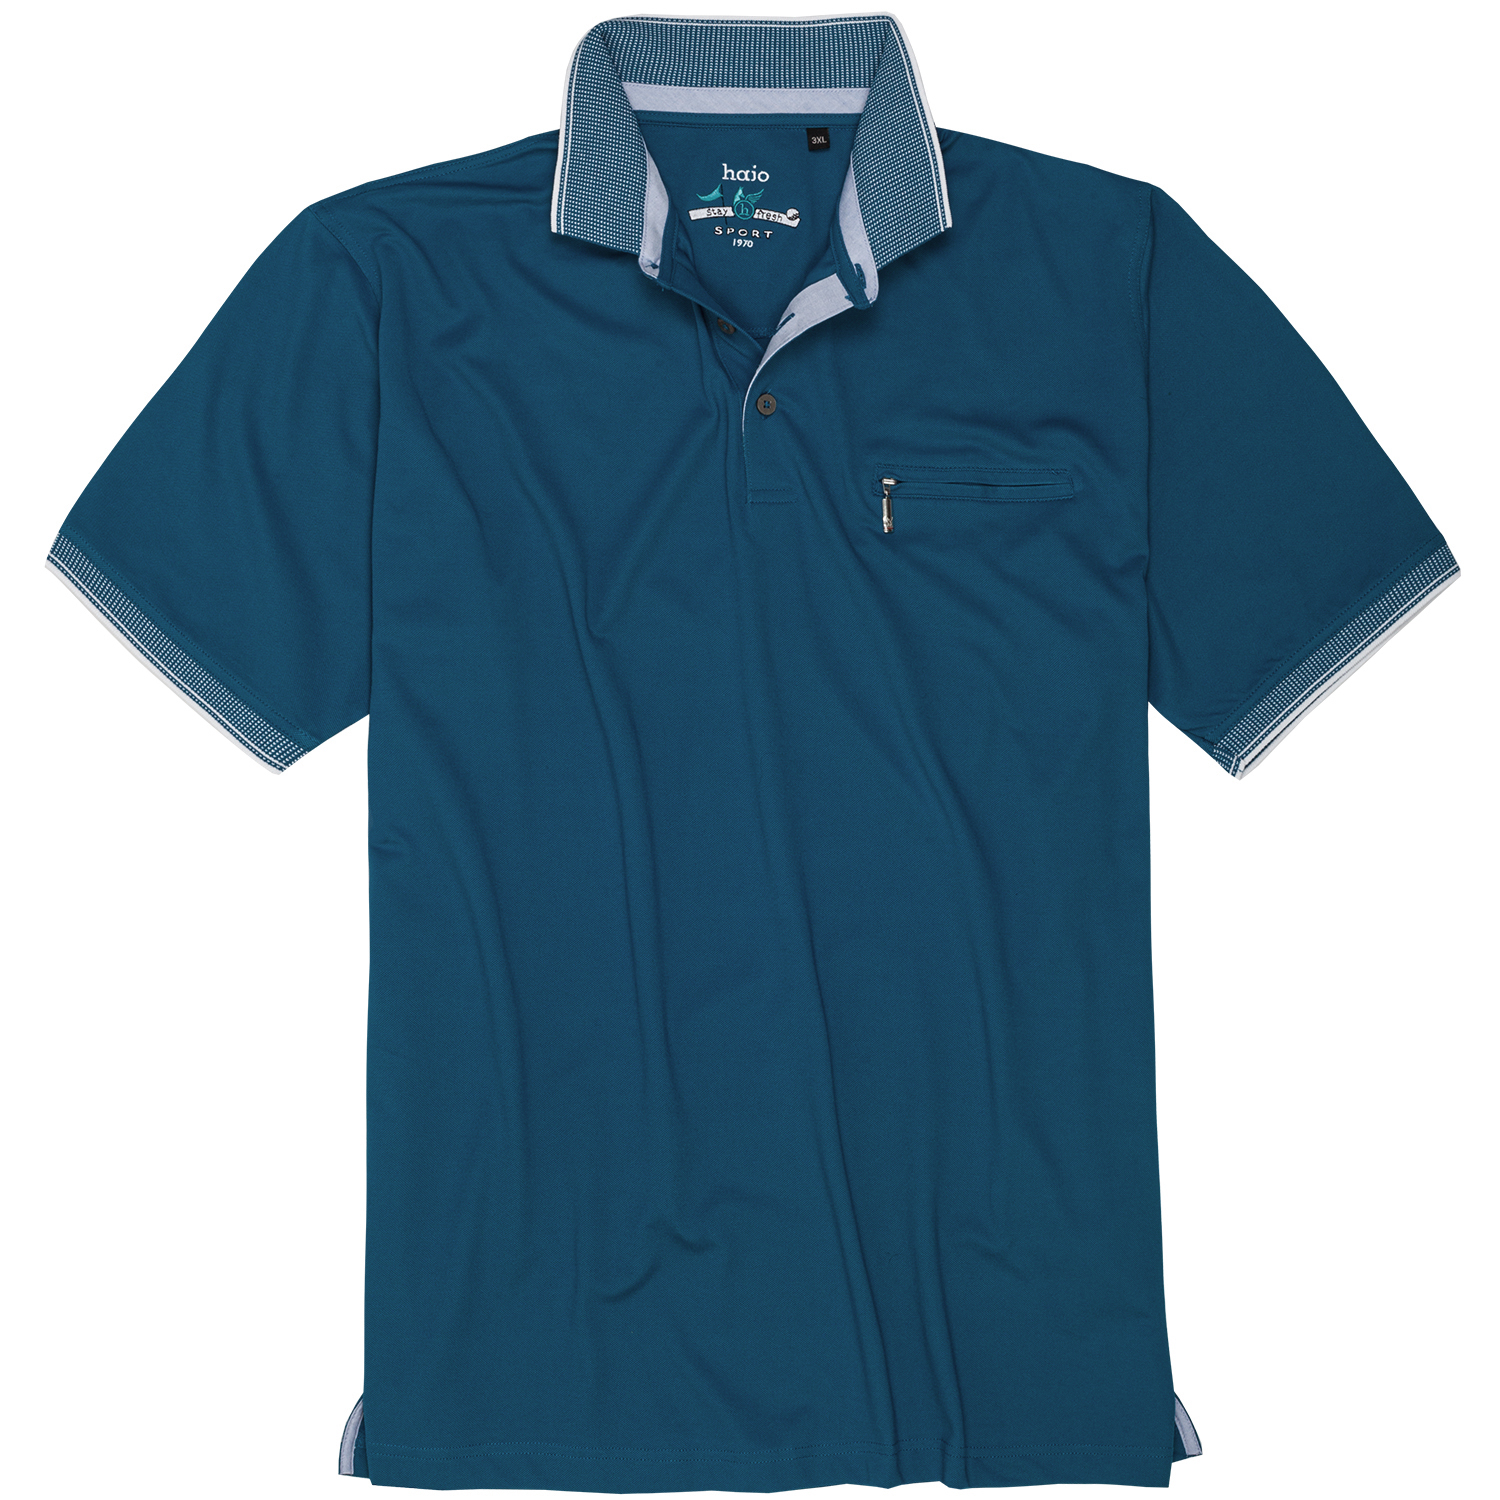 Polo shirt "stay fresh" by hajo up to oversize 6XL - colour admiral blue